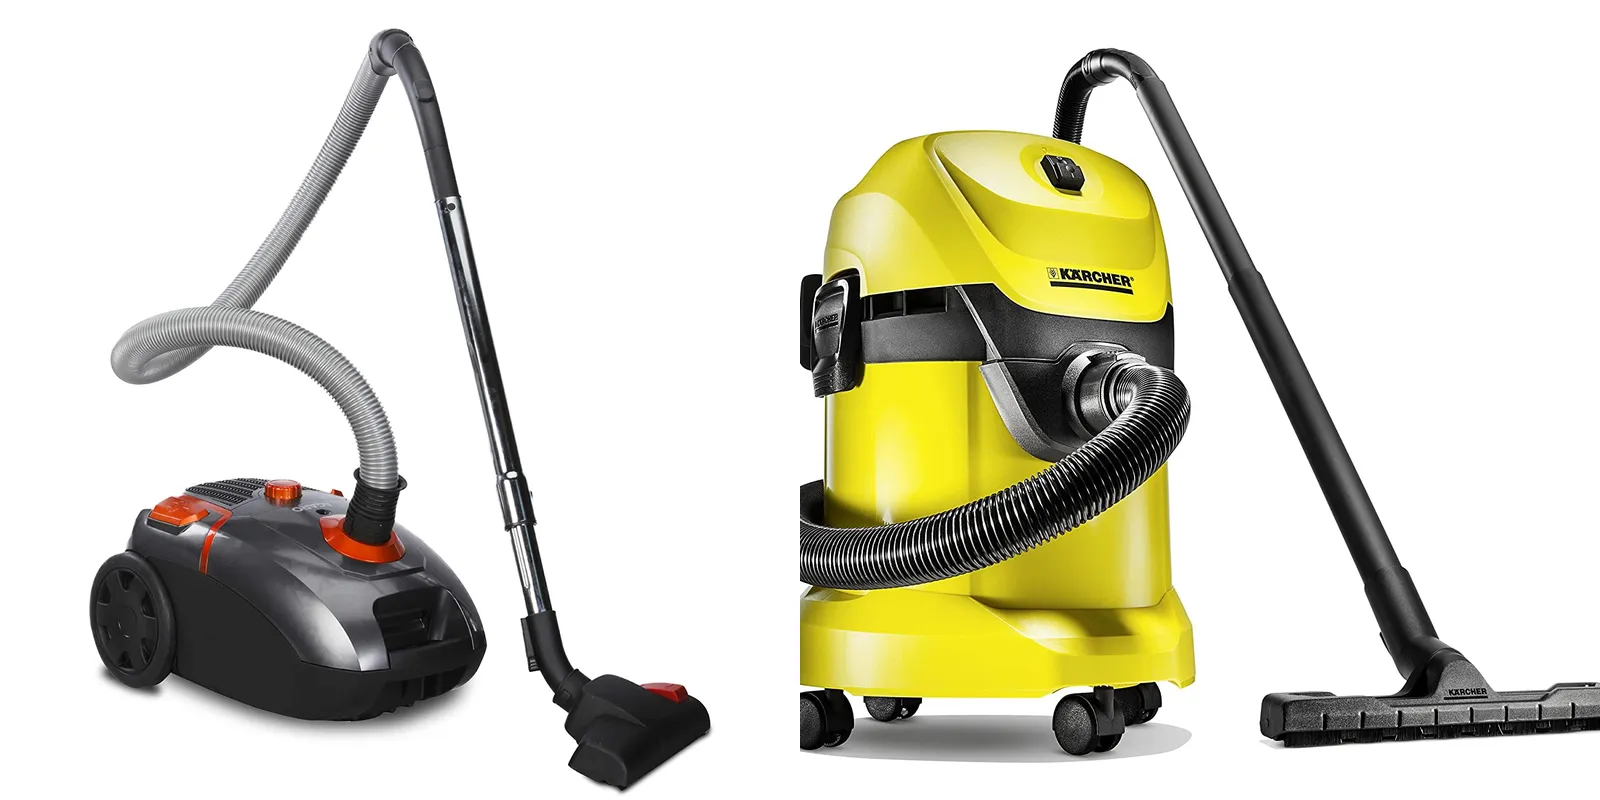 What is Vacuum Cleaner In India?